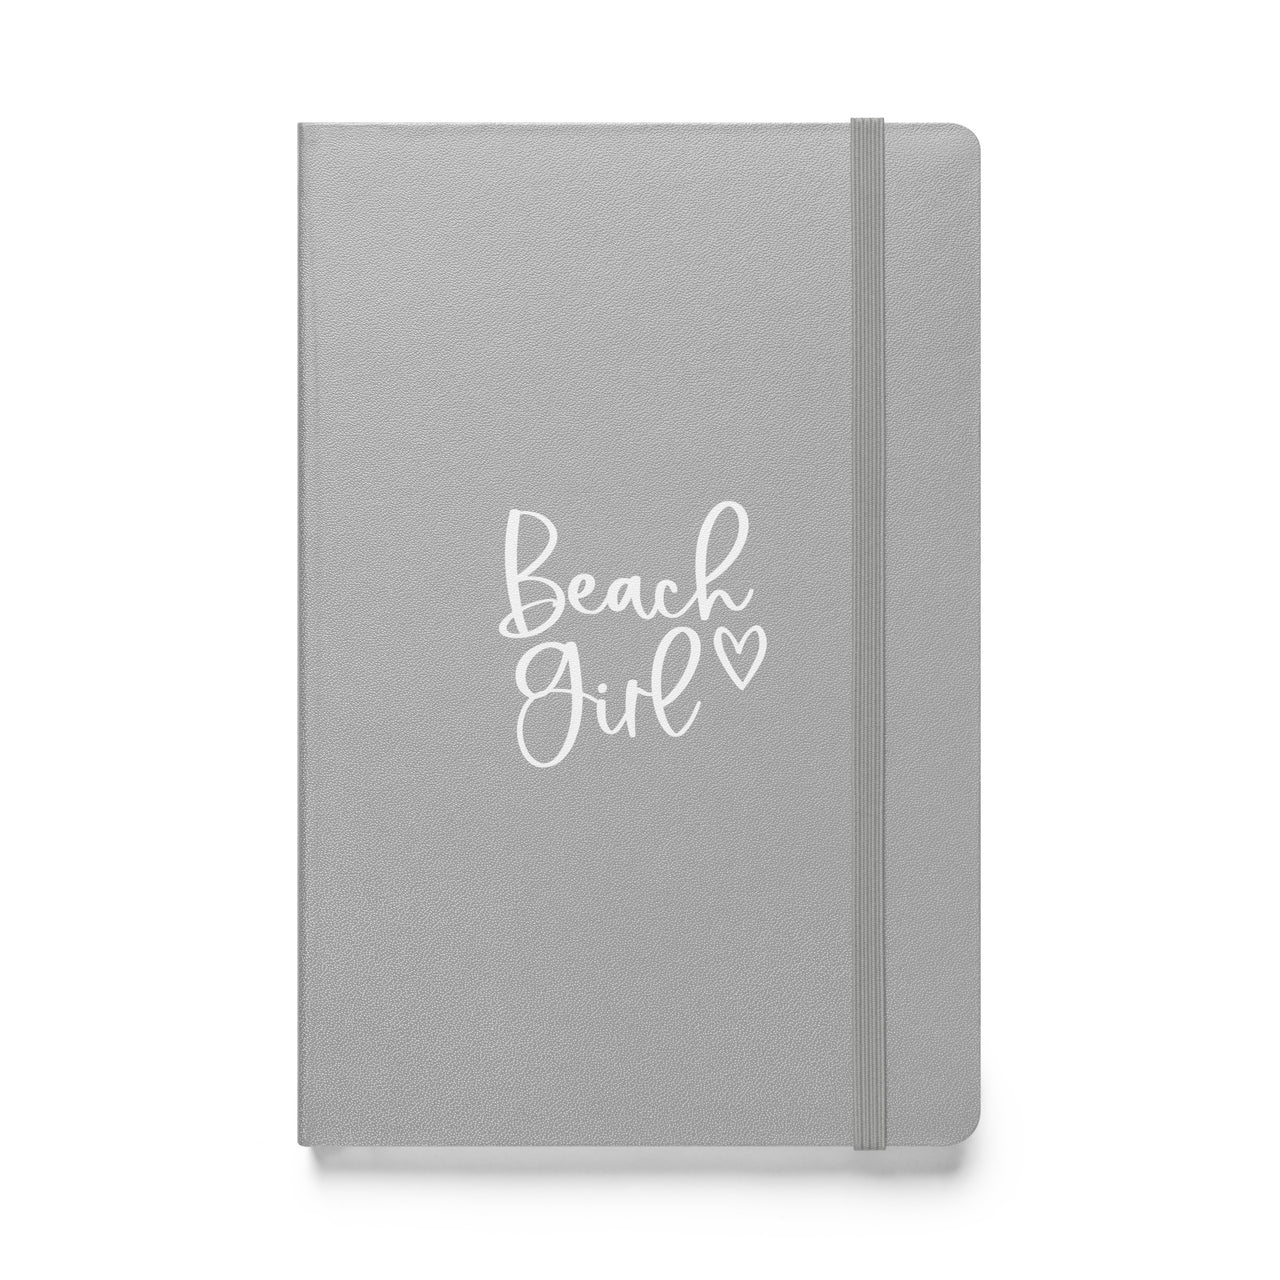 Beach Girl Hardcover Journal, 5.5" x 8.5"  New England Trading Co Silver  